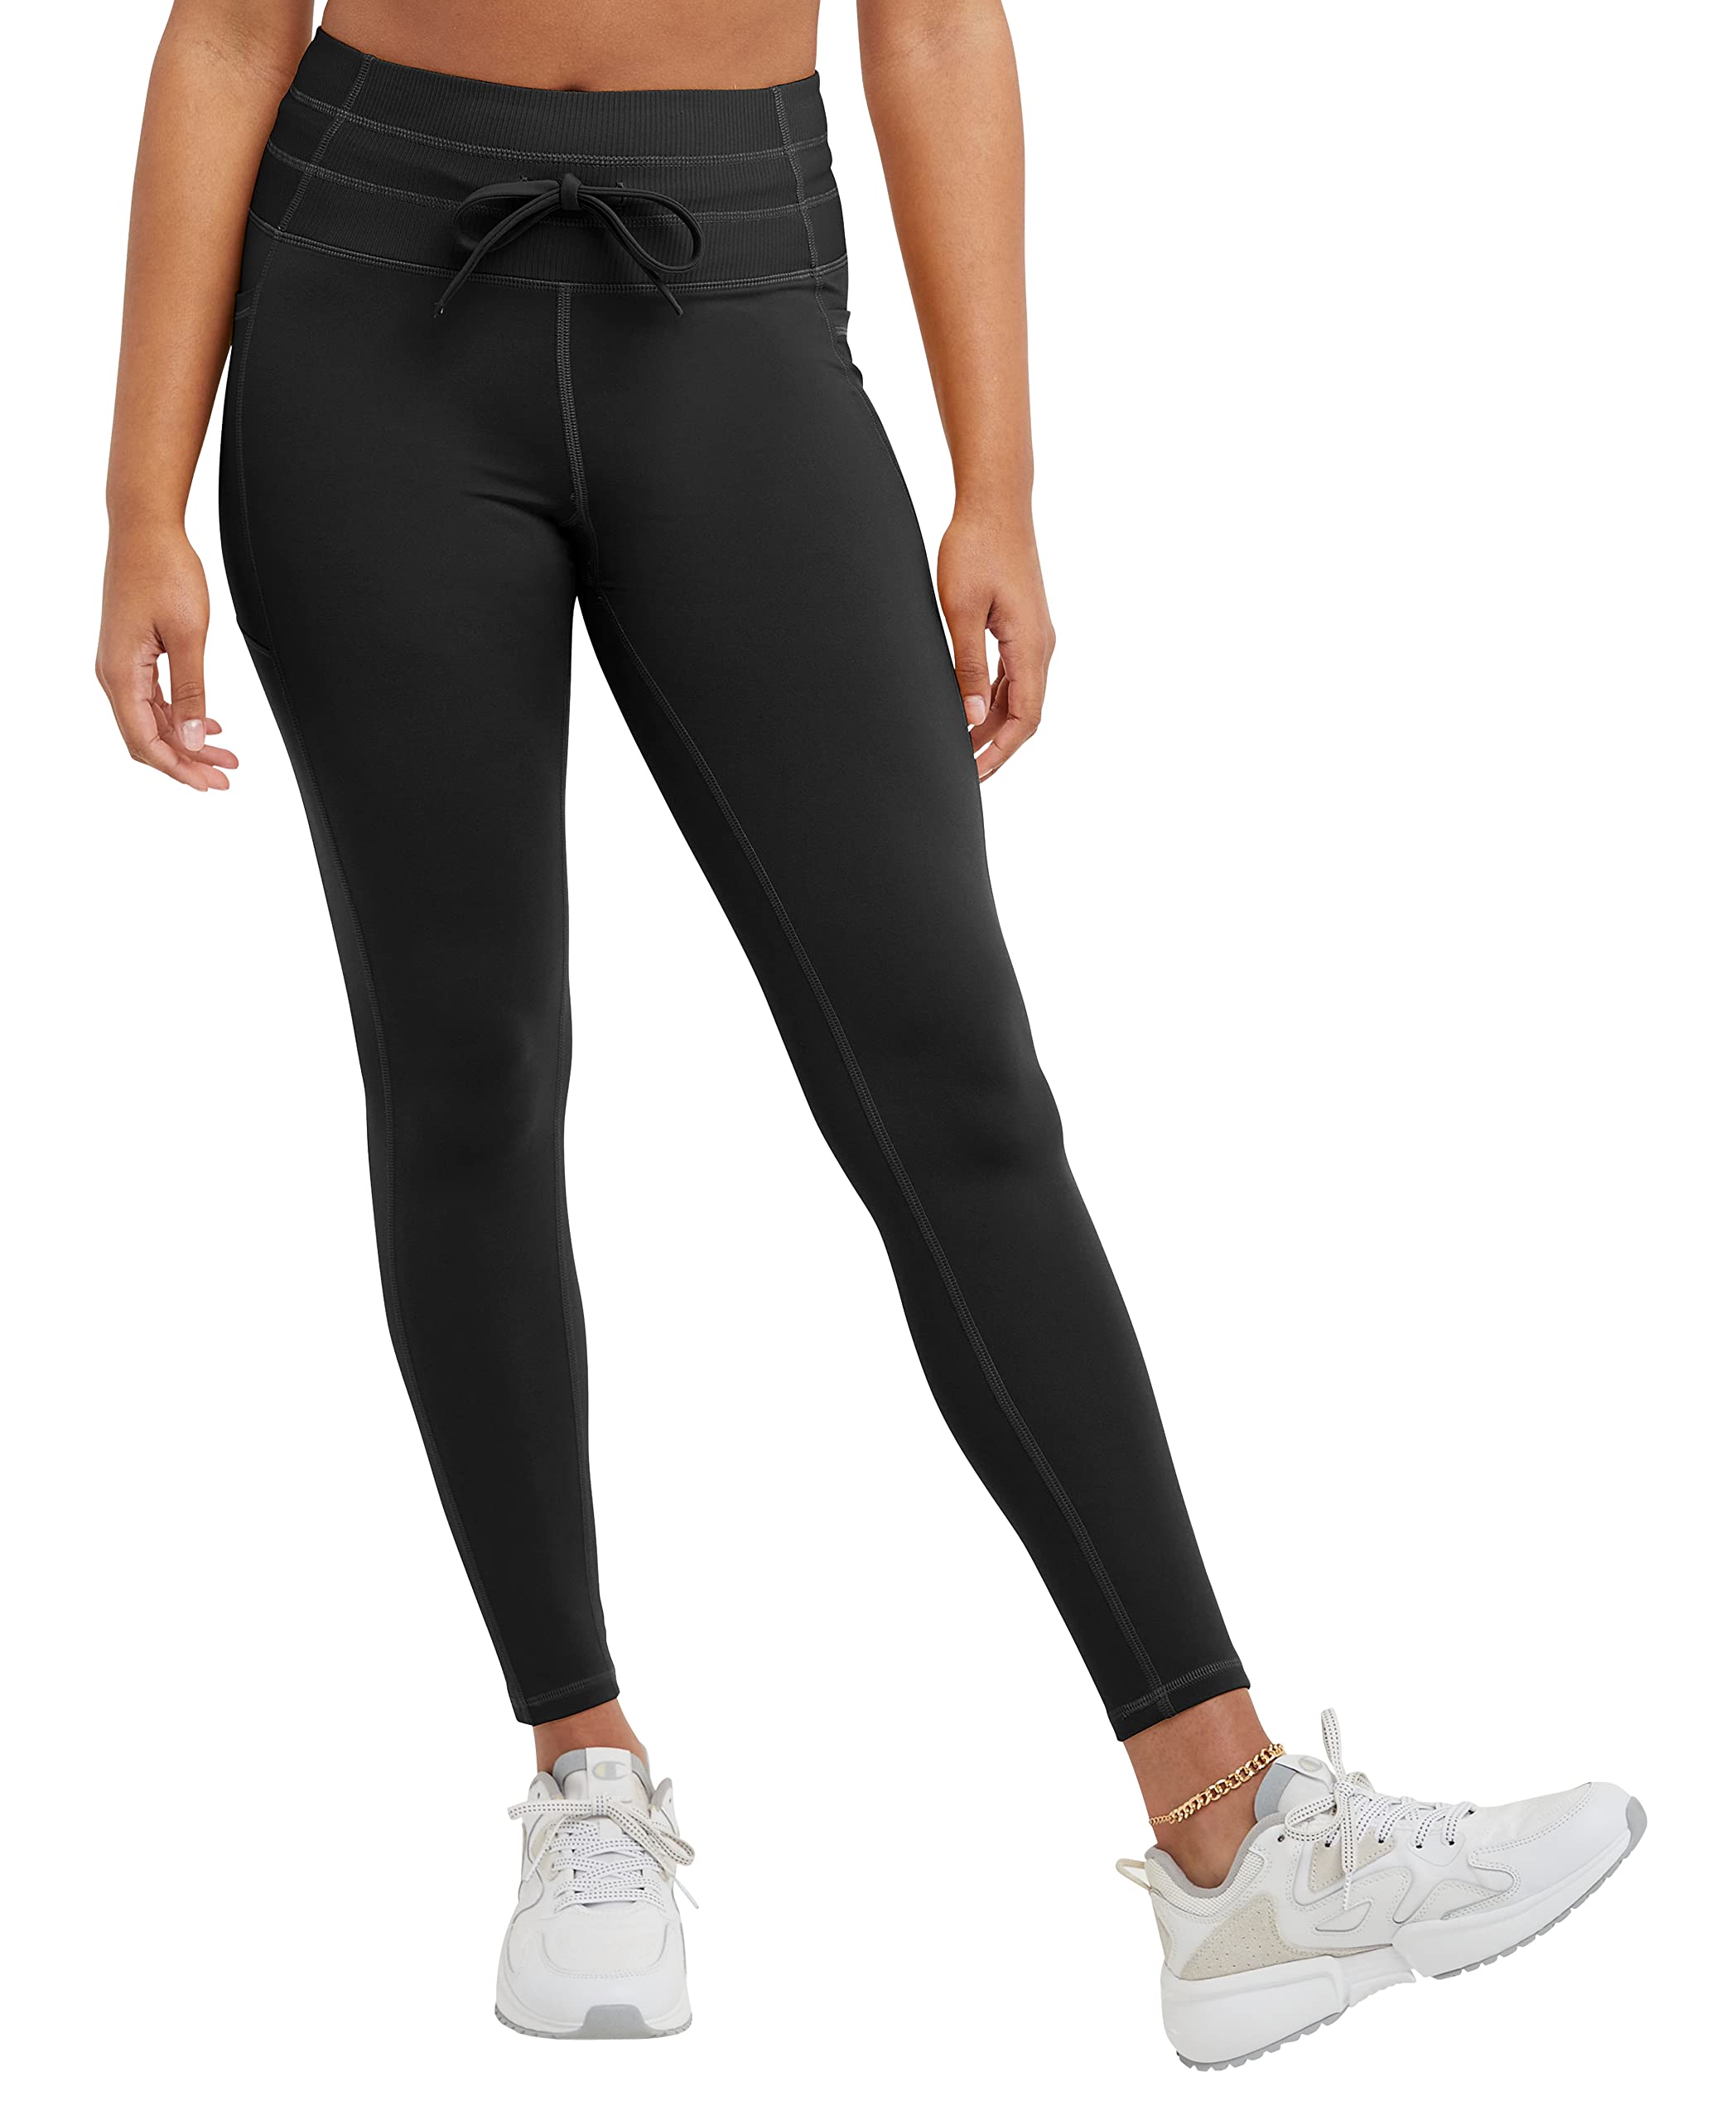 Champion Soft Touch Moisture Wicking Drawcord Leggings for Women 25 Black X-Small